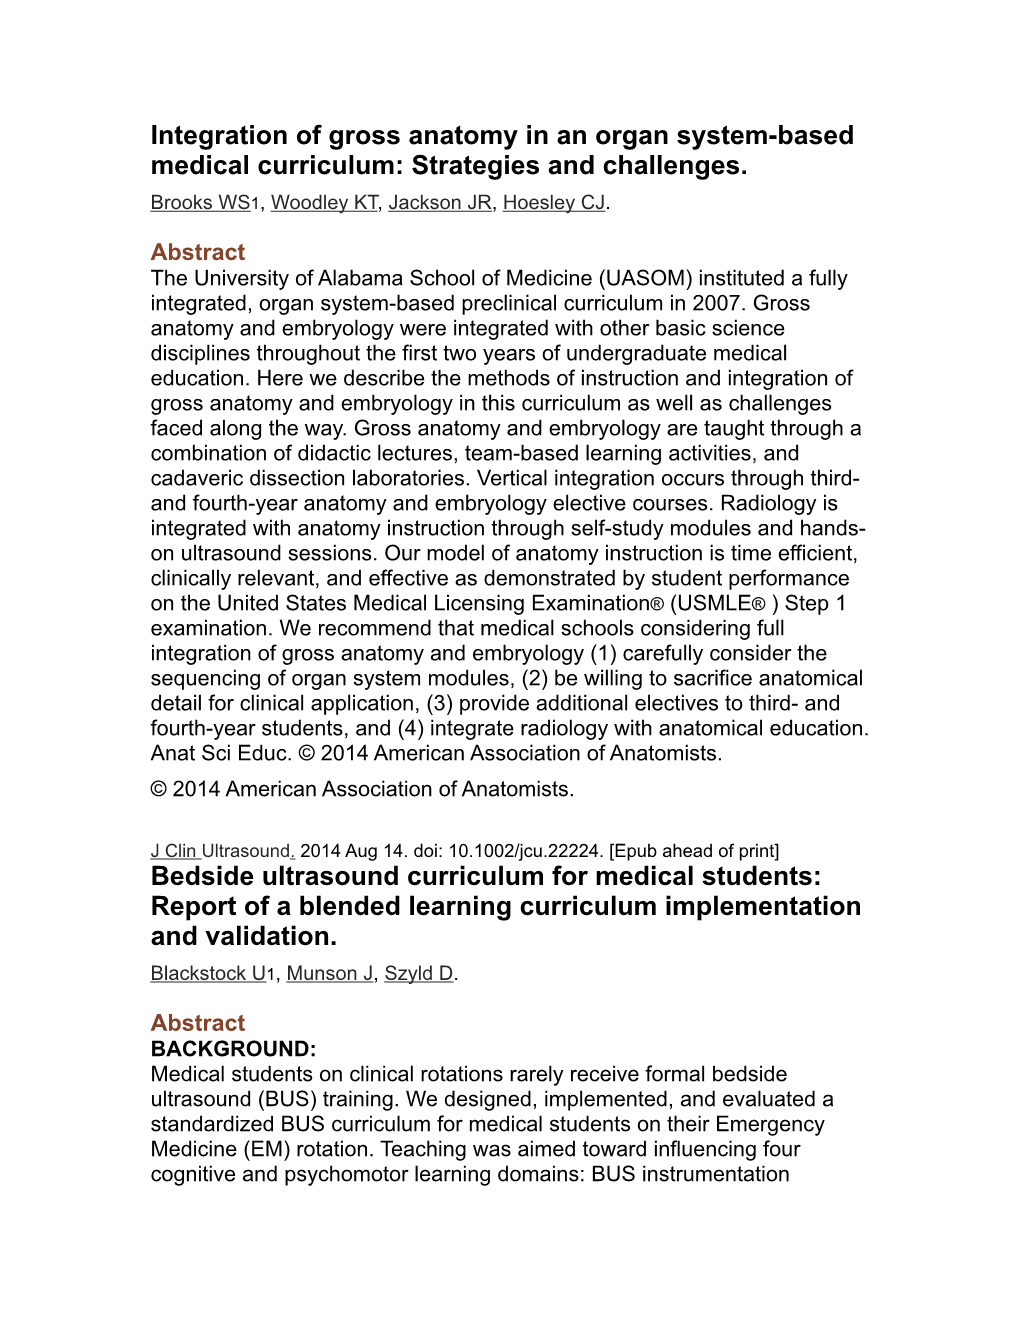 Integration of Gross Anatomy in an Organ System-Based Medical Curriculum: Strategies and Challenges